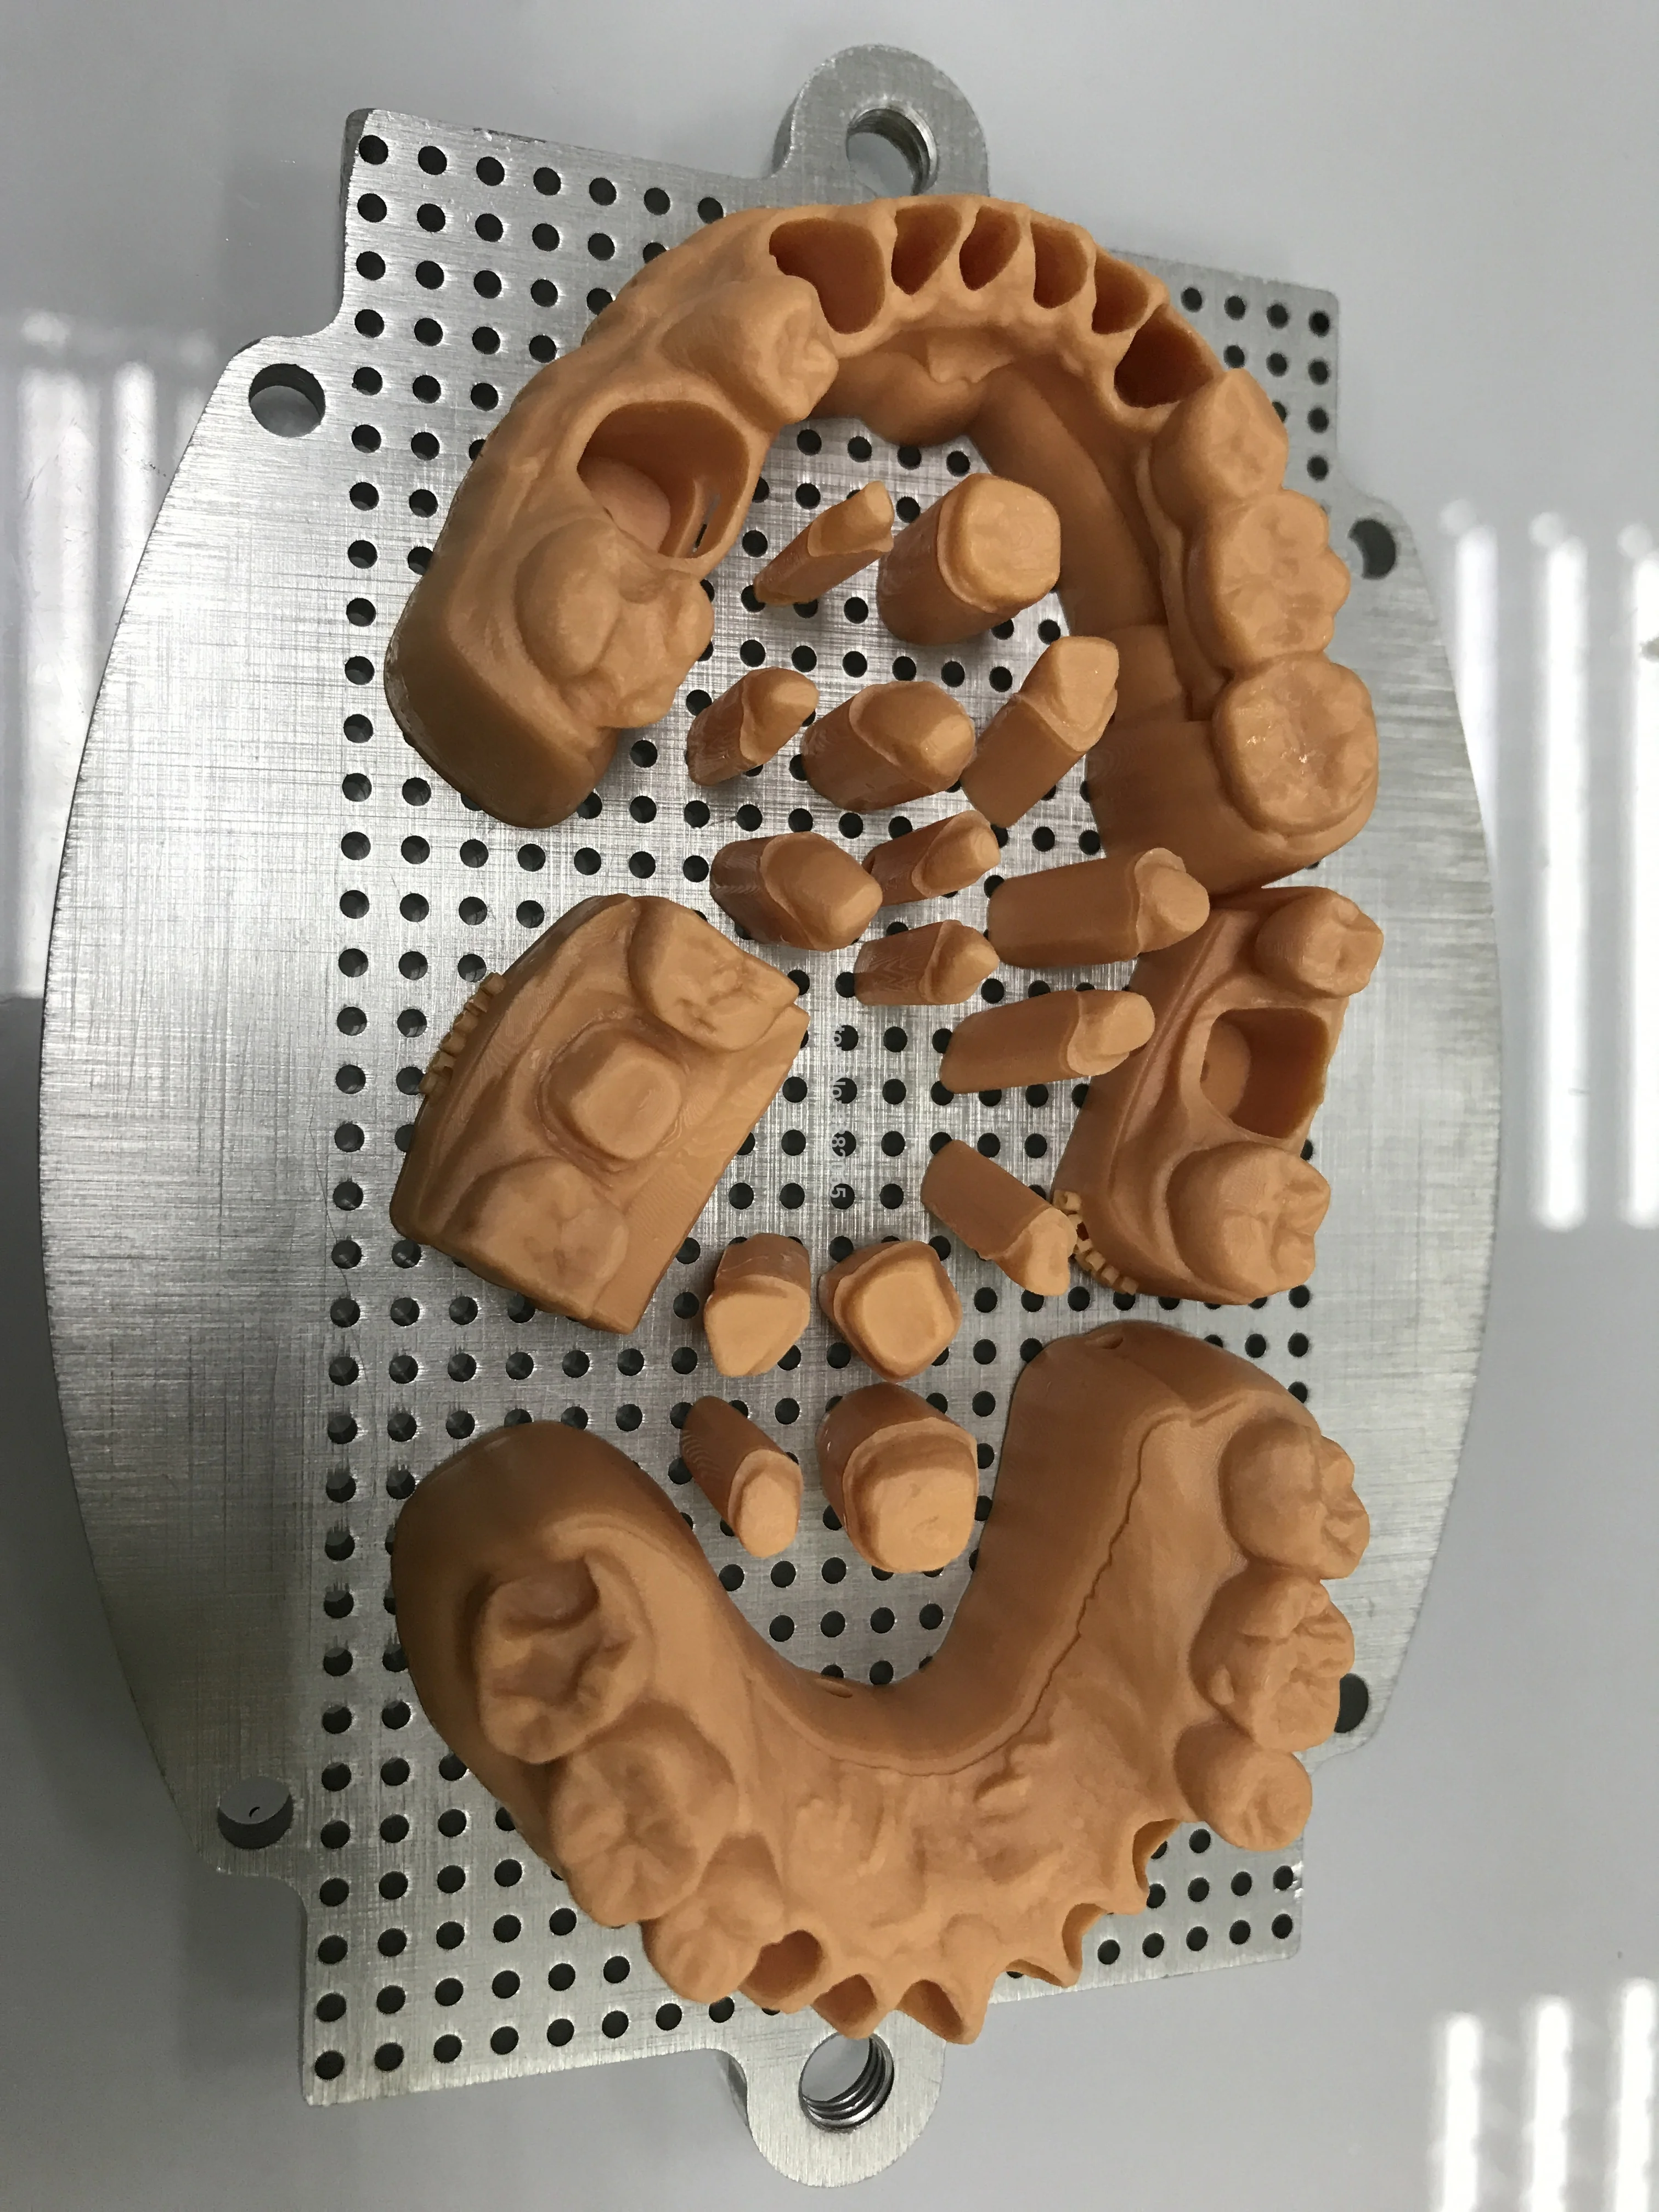 DLP LCD SLA 3D printer photopolymer resin tooth model resin, used for orthodontic restoration implants, suitable for Shining 3D